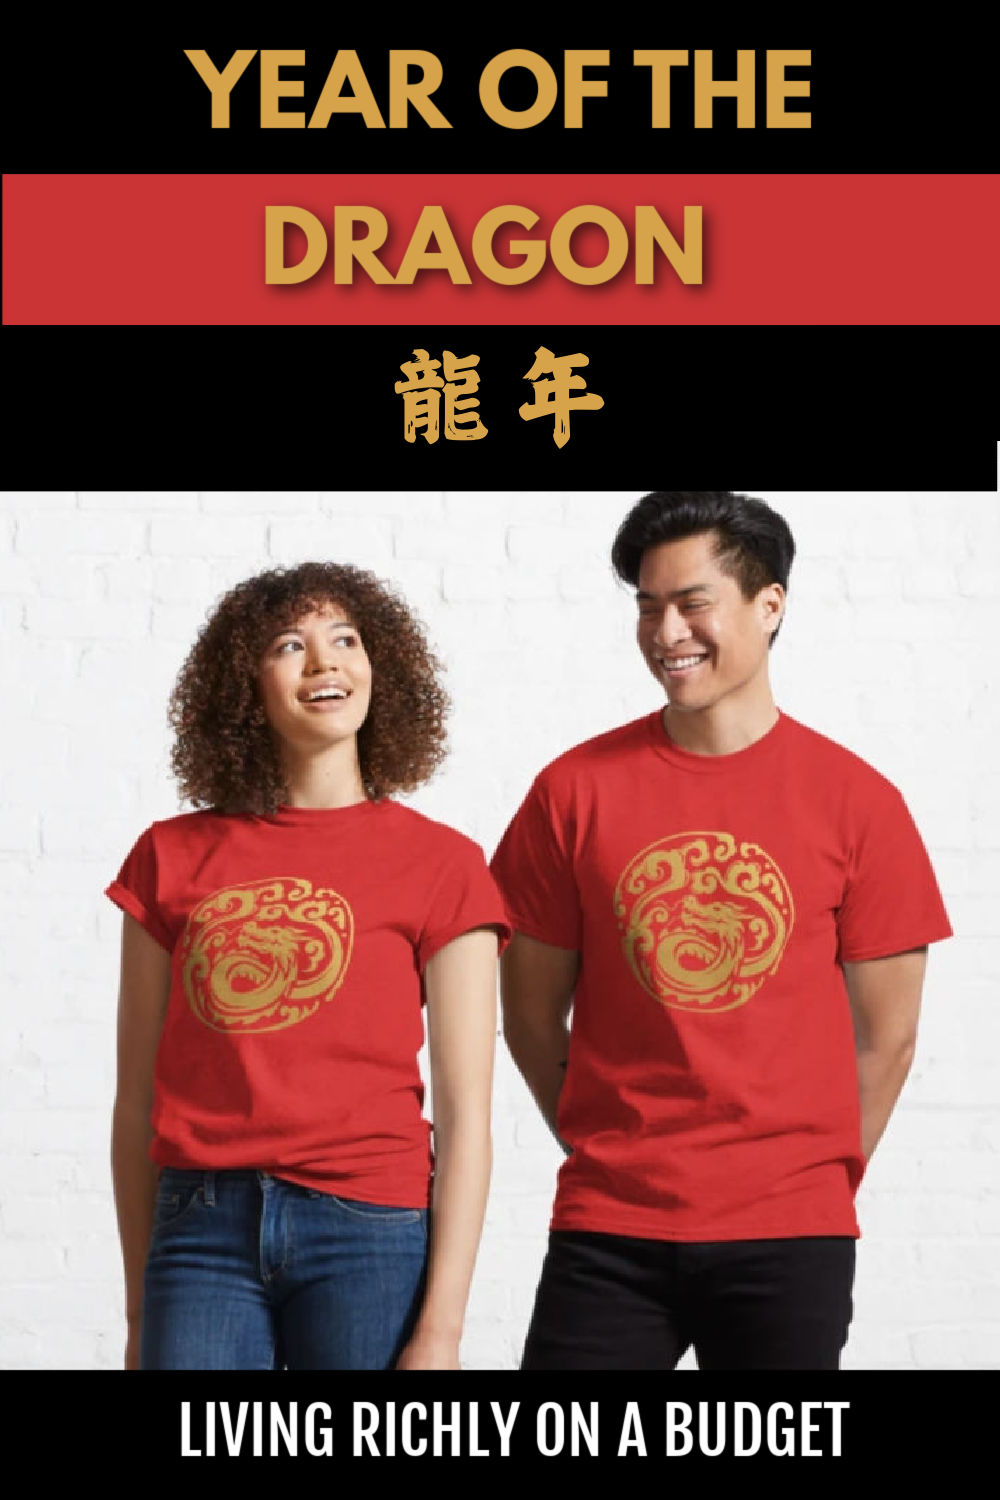 year-of-the-dragon-t-shirt